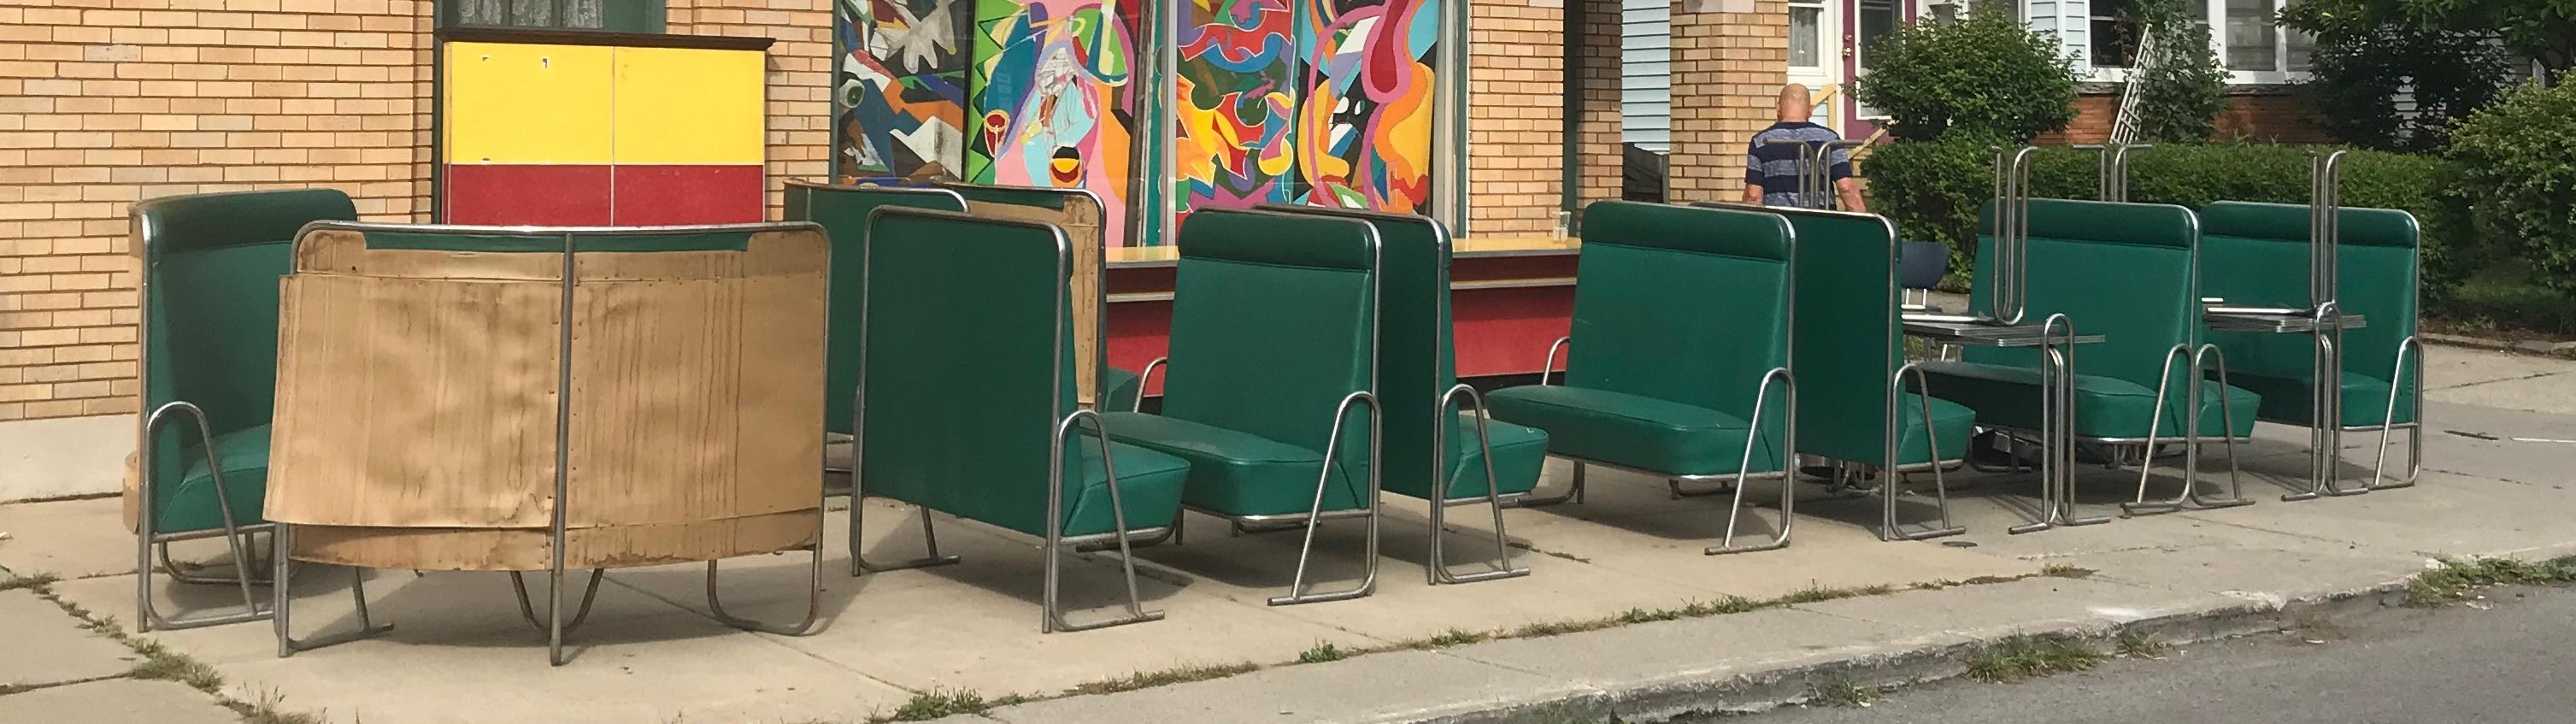 Original Art Deco Diner, Seats 40 Designed by Wolfgang Hoffmann for Howell 1930s 2